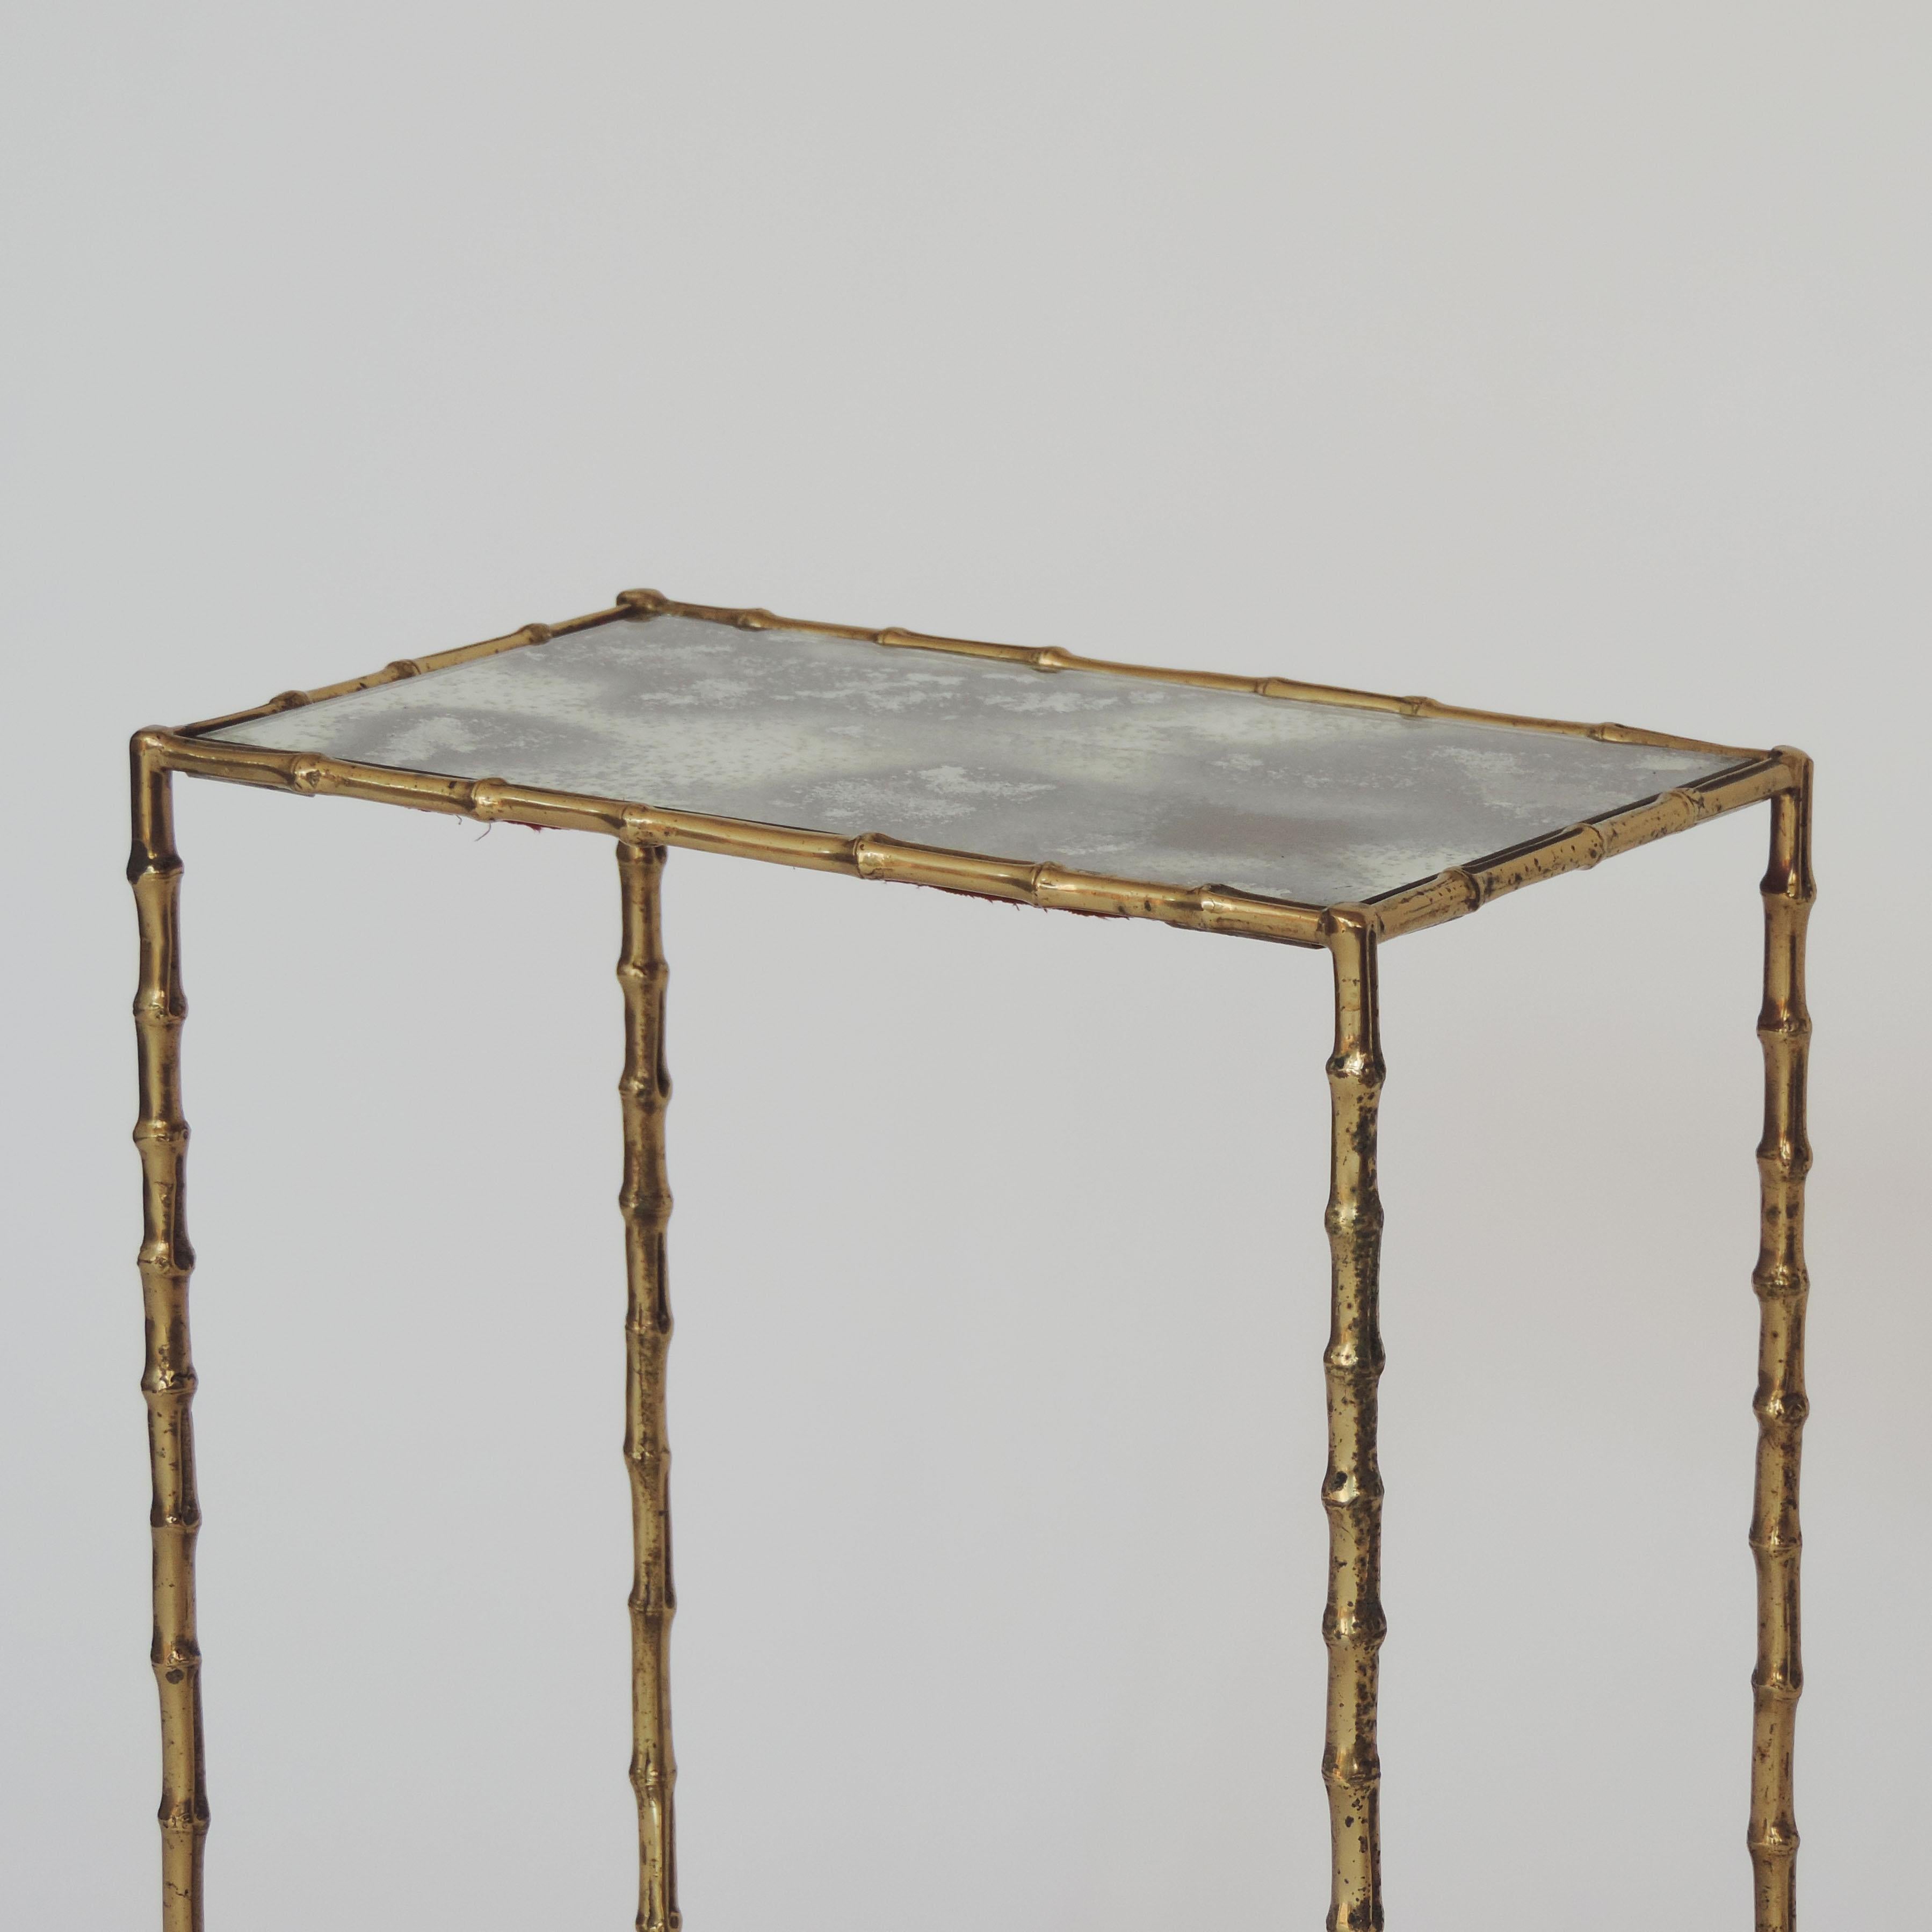 Hollywood Regency Brass Faux Bamboo Two-Tier Side Table, Maison Baguès Style